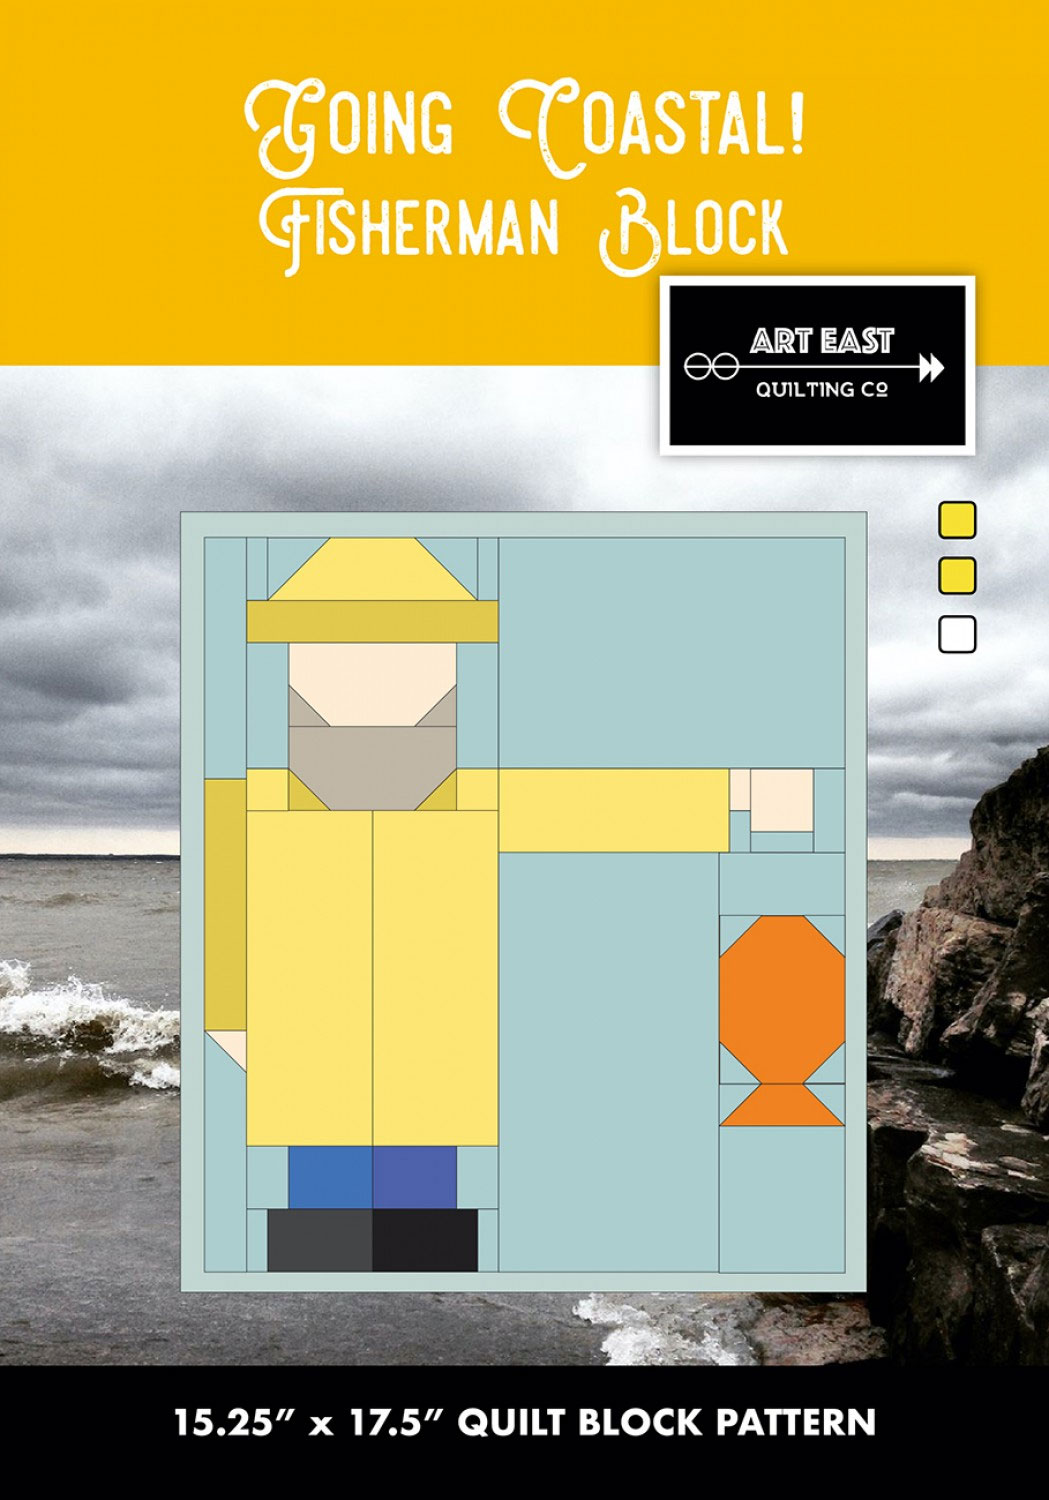 Fisherman-Block-sewing-pattern-Art-East-Quilting-Co-front